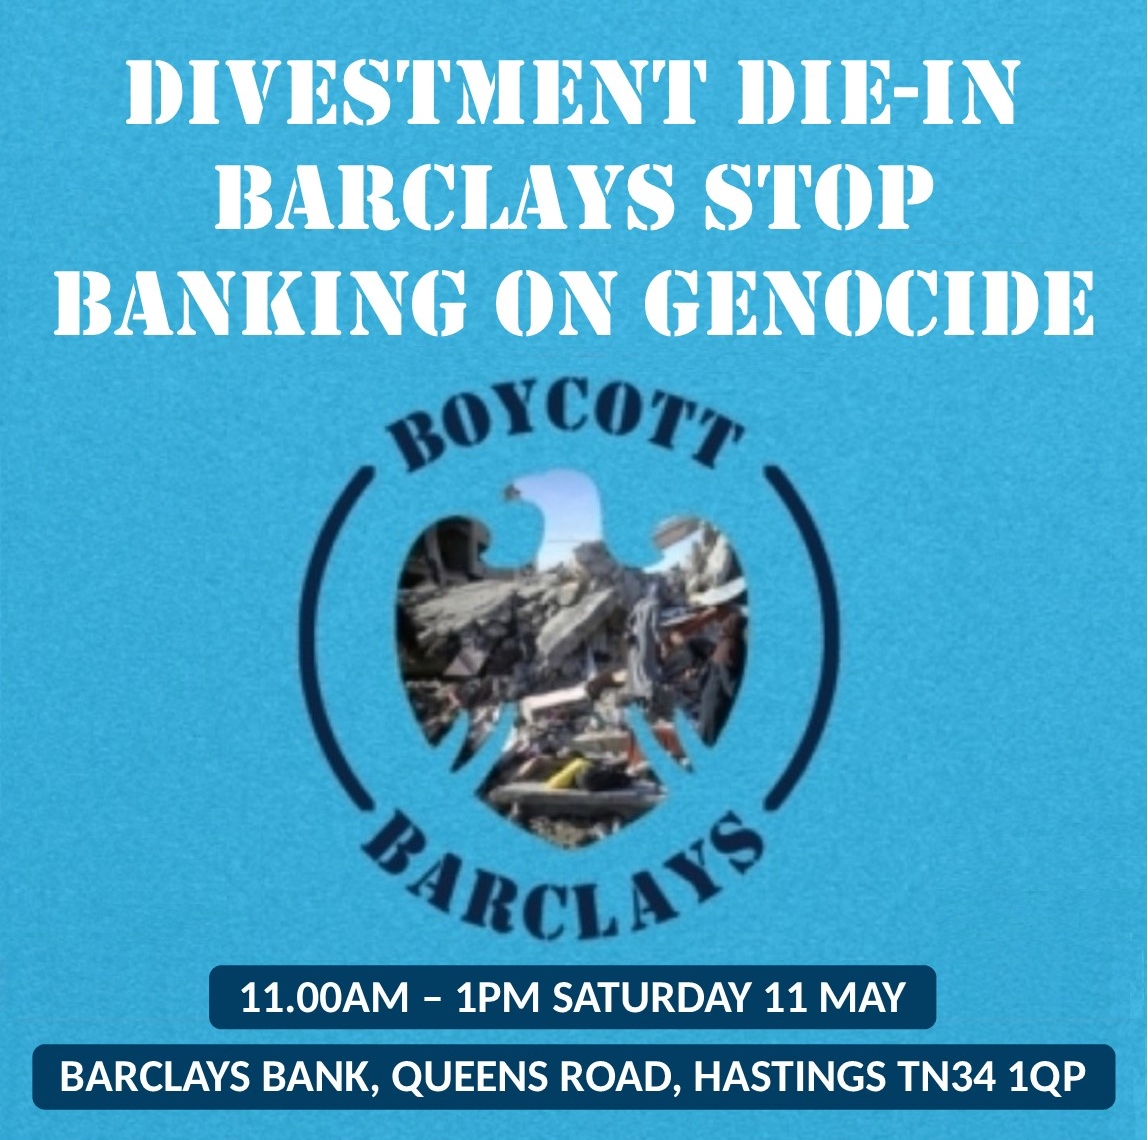 ⚫️ We're holding a die-in at Barclays. It has increased its investments in companies supplying armaments for Israel's genocidal policies to £2+ billion. The die-in will represent medics, journalists, children that have been murdered by Israel in Gaza. facebook.com/events/4635081…